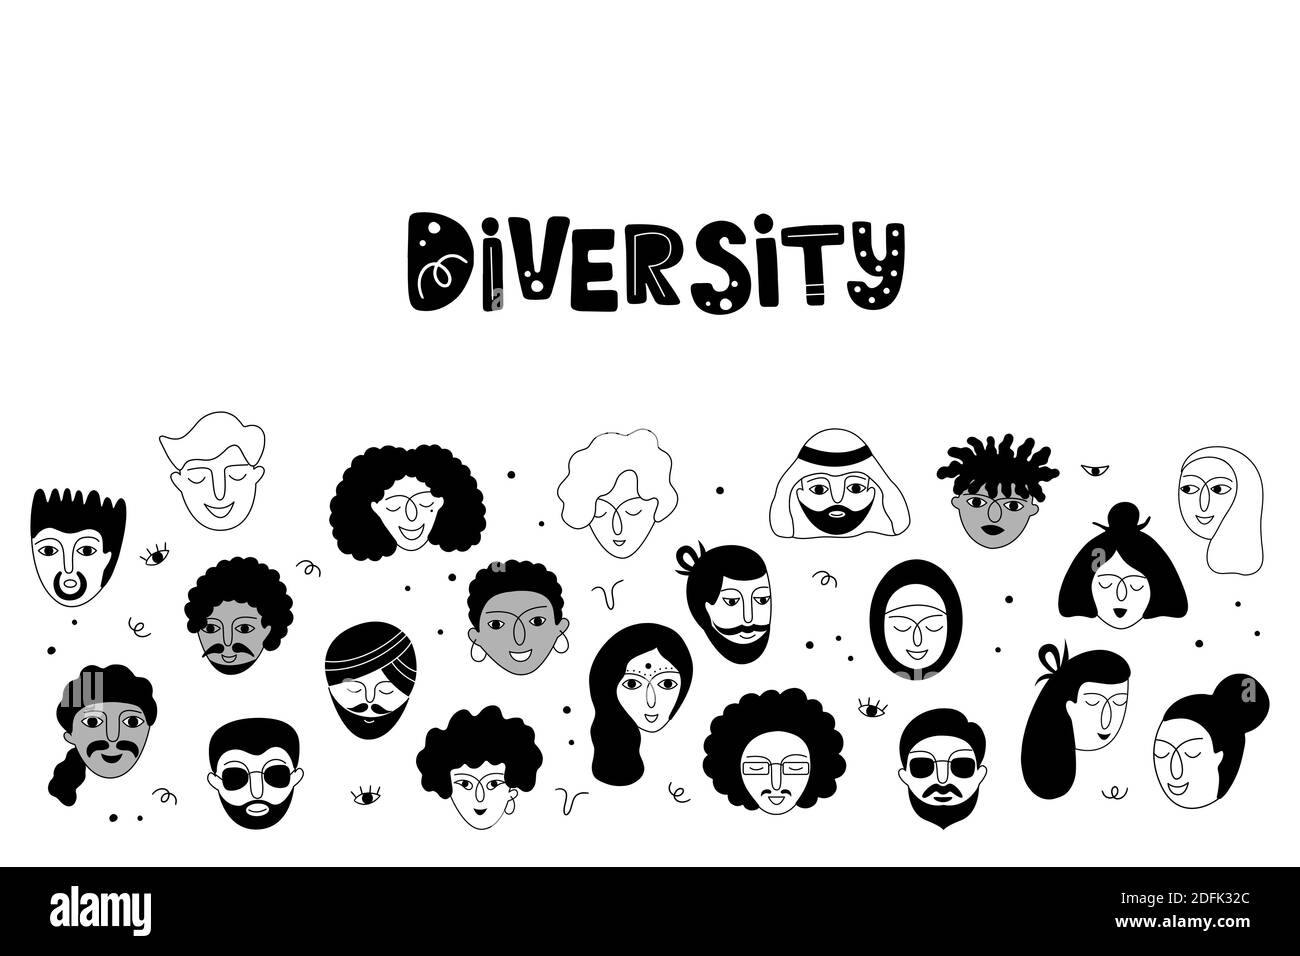 Social diversity. Vector illustration with various people faces presenting person team diversity in the company. Stock Vector